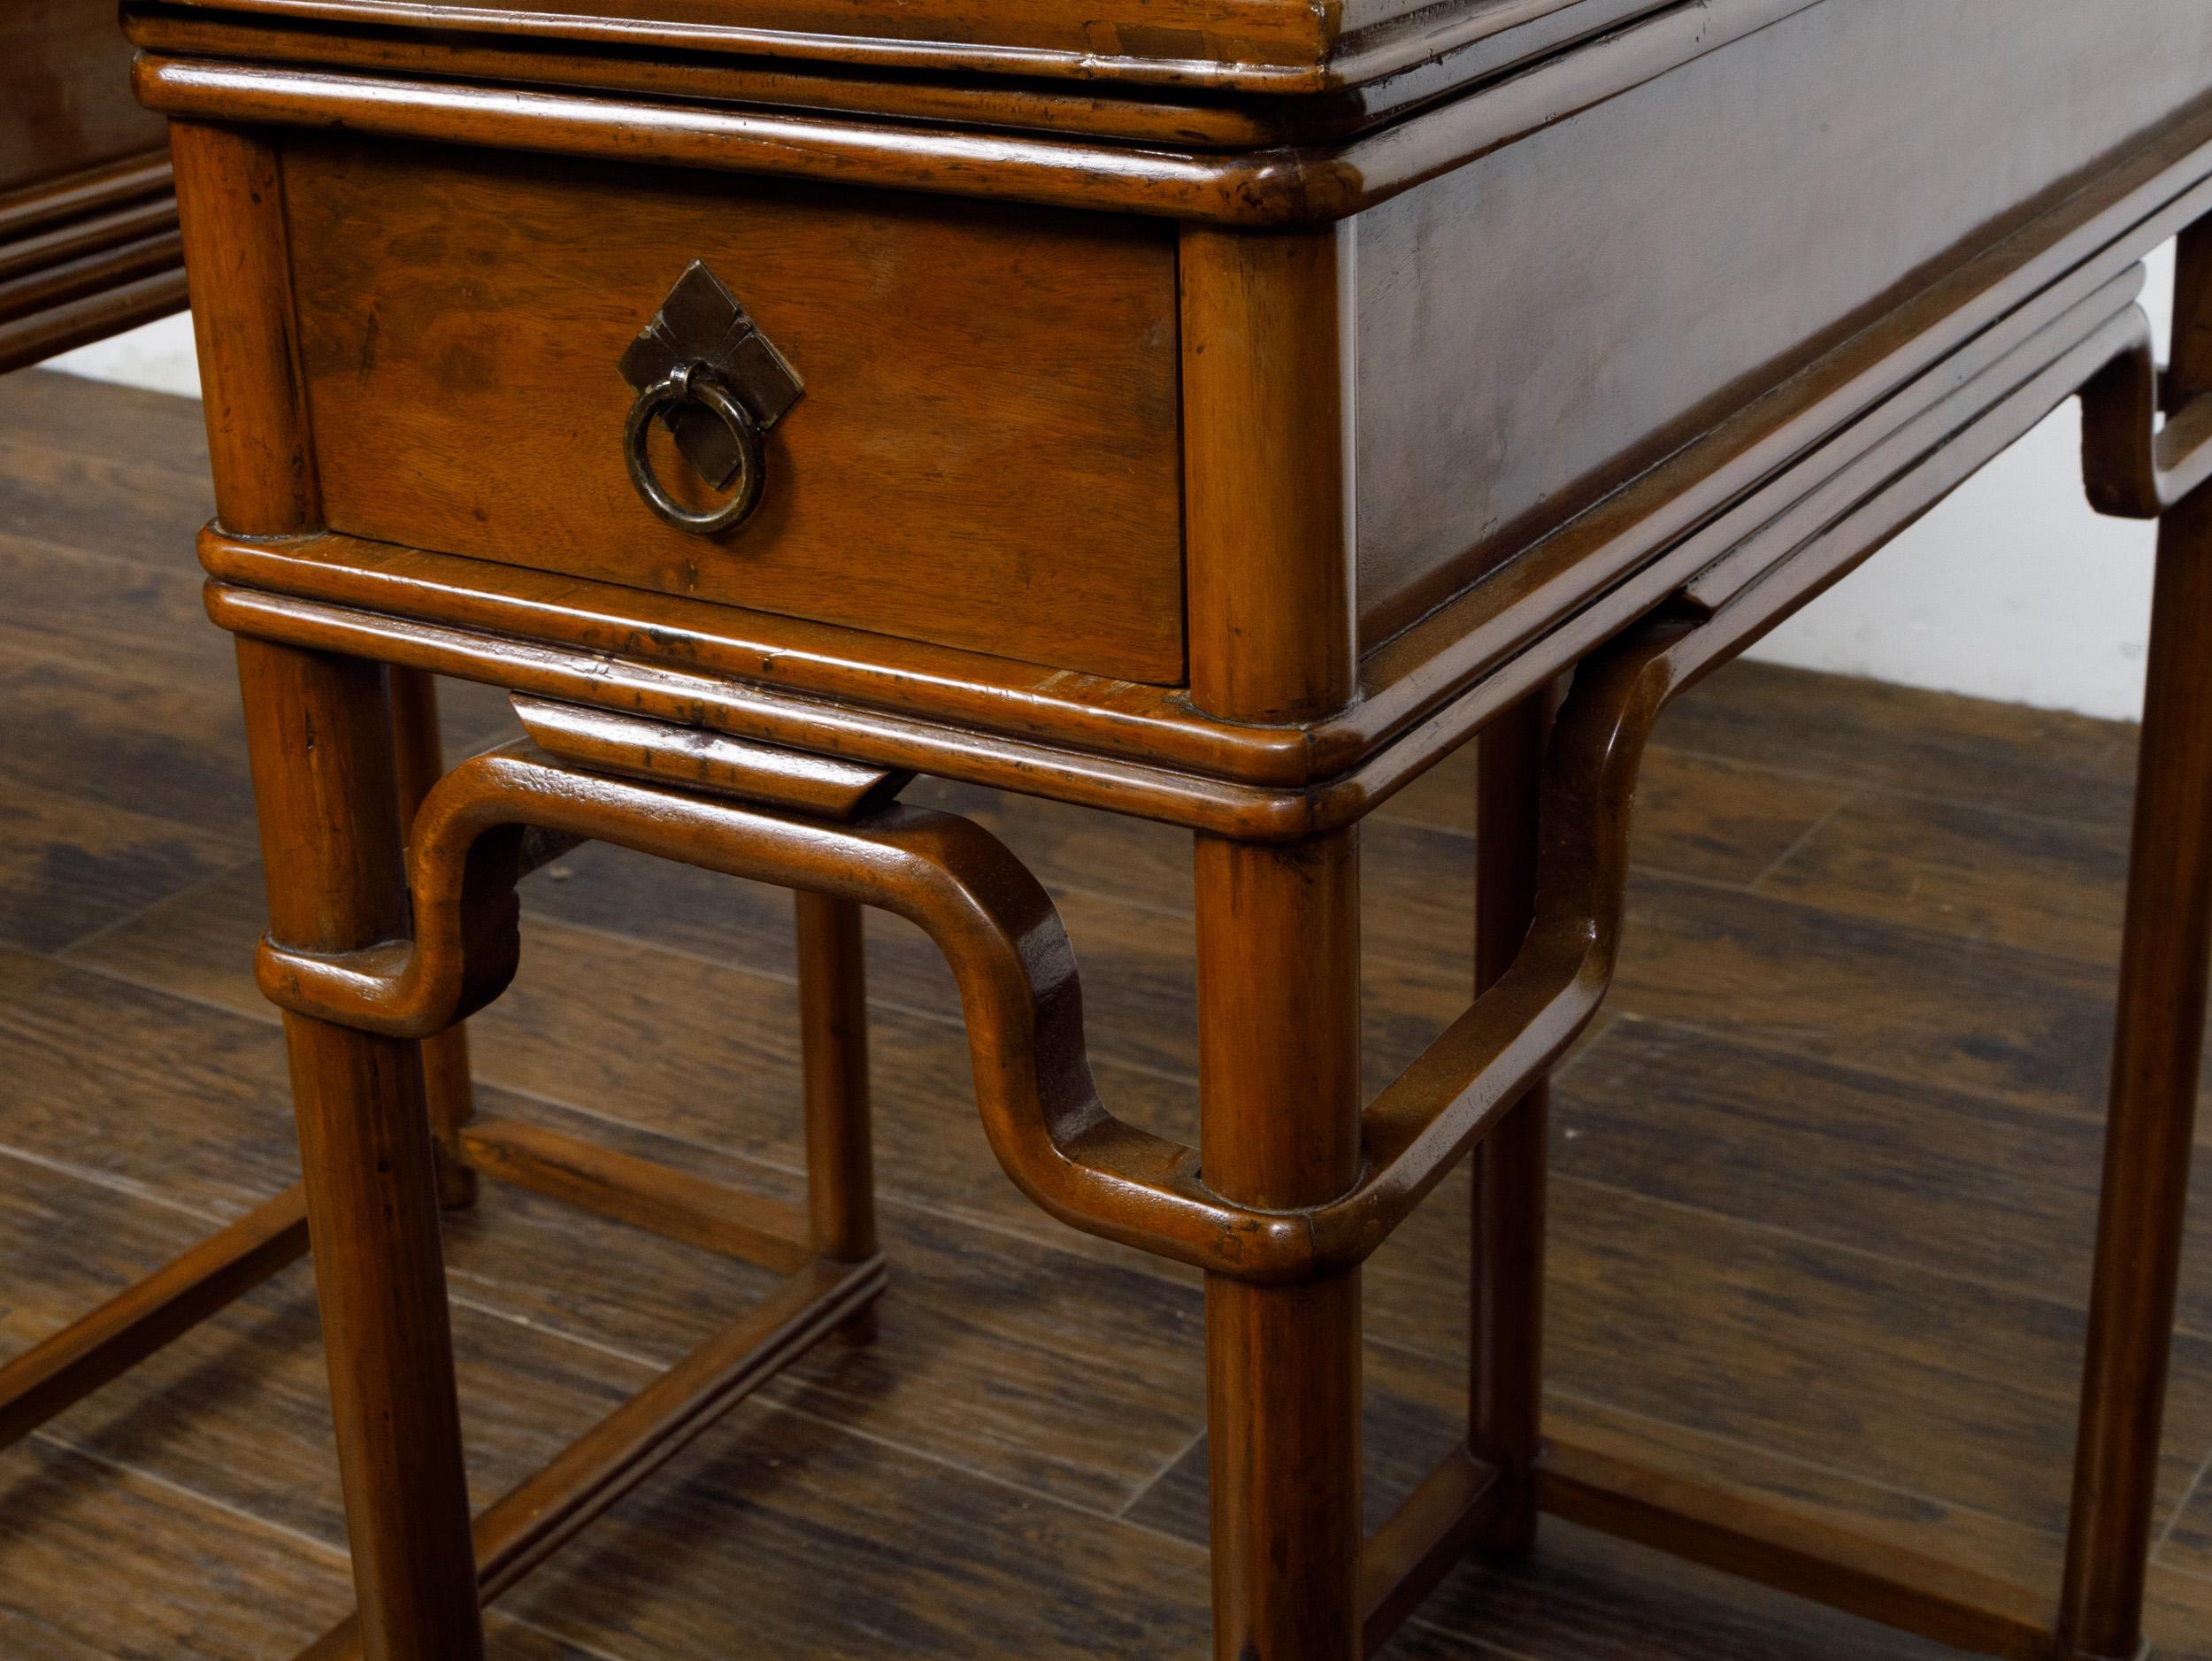 Pair of Teak 19th Century Console Tables with Drawers and Humpback Stretchers For Sale 6